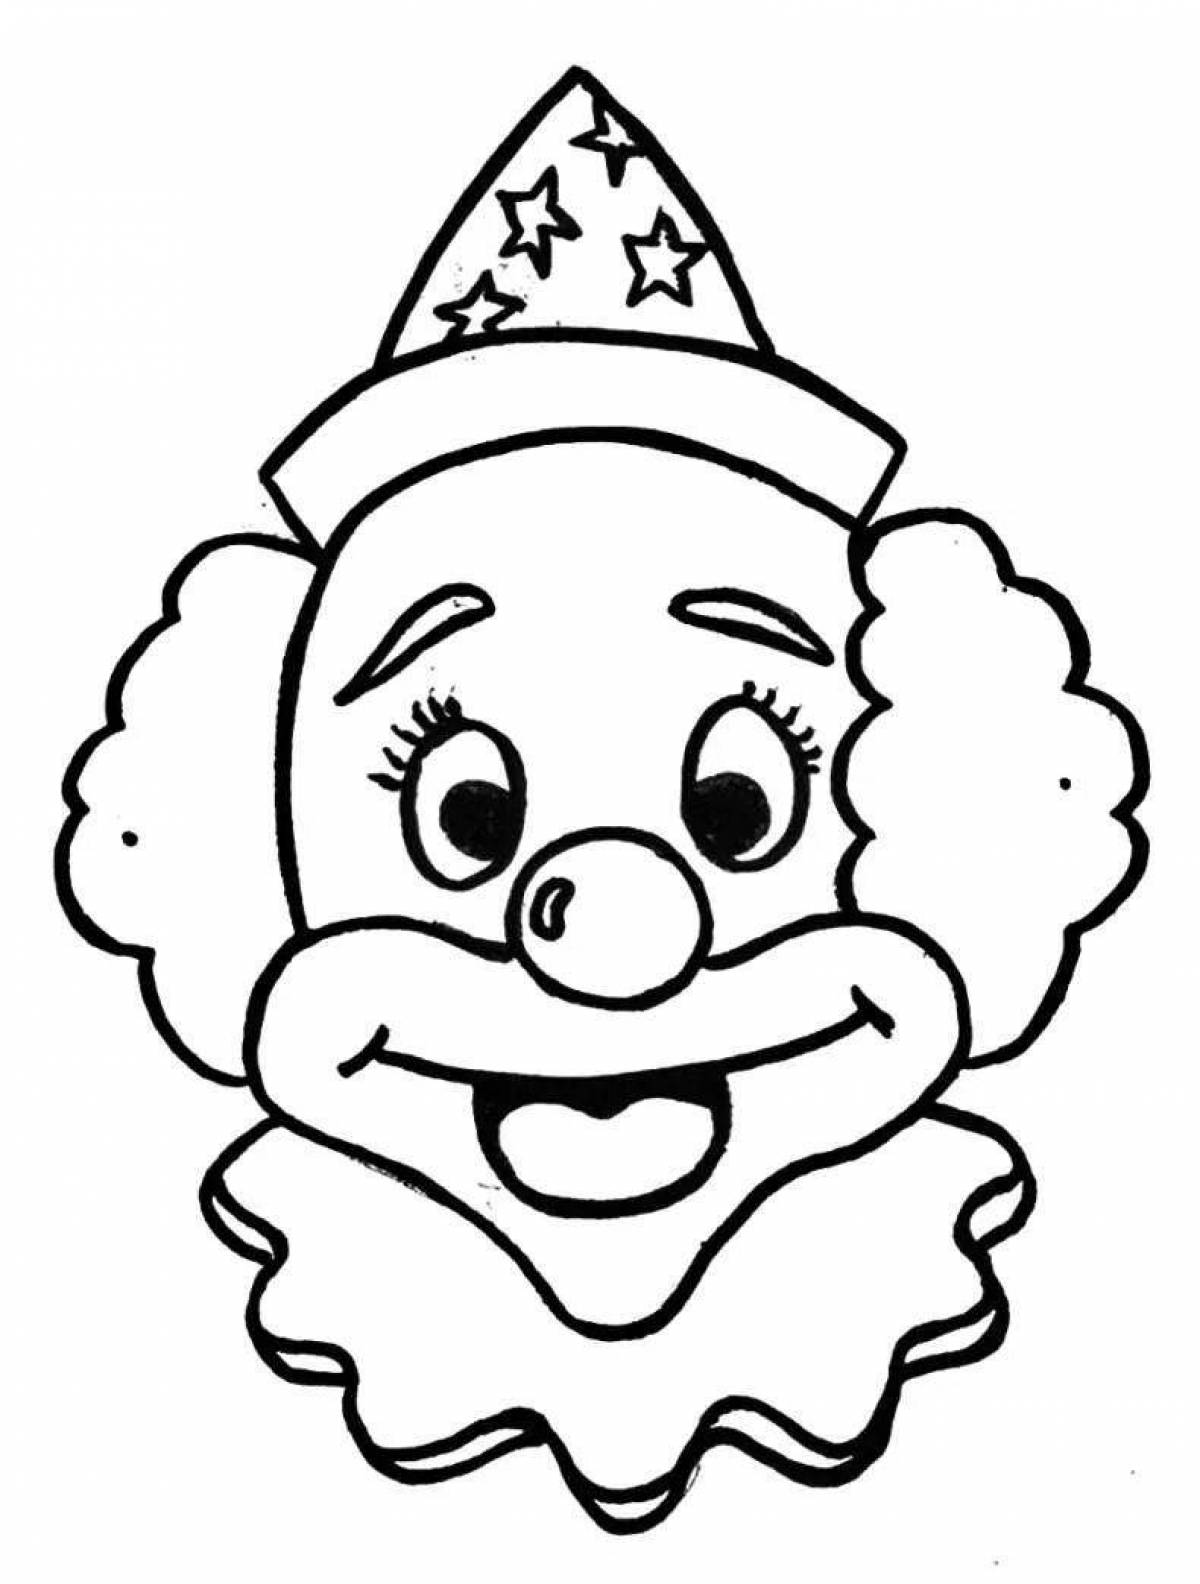 Stylish clown face coloring page